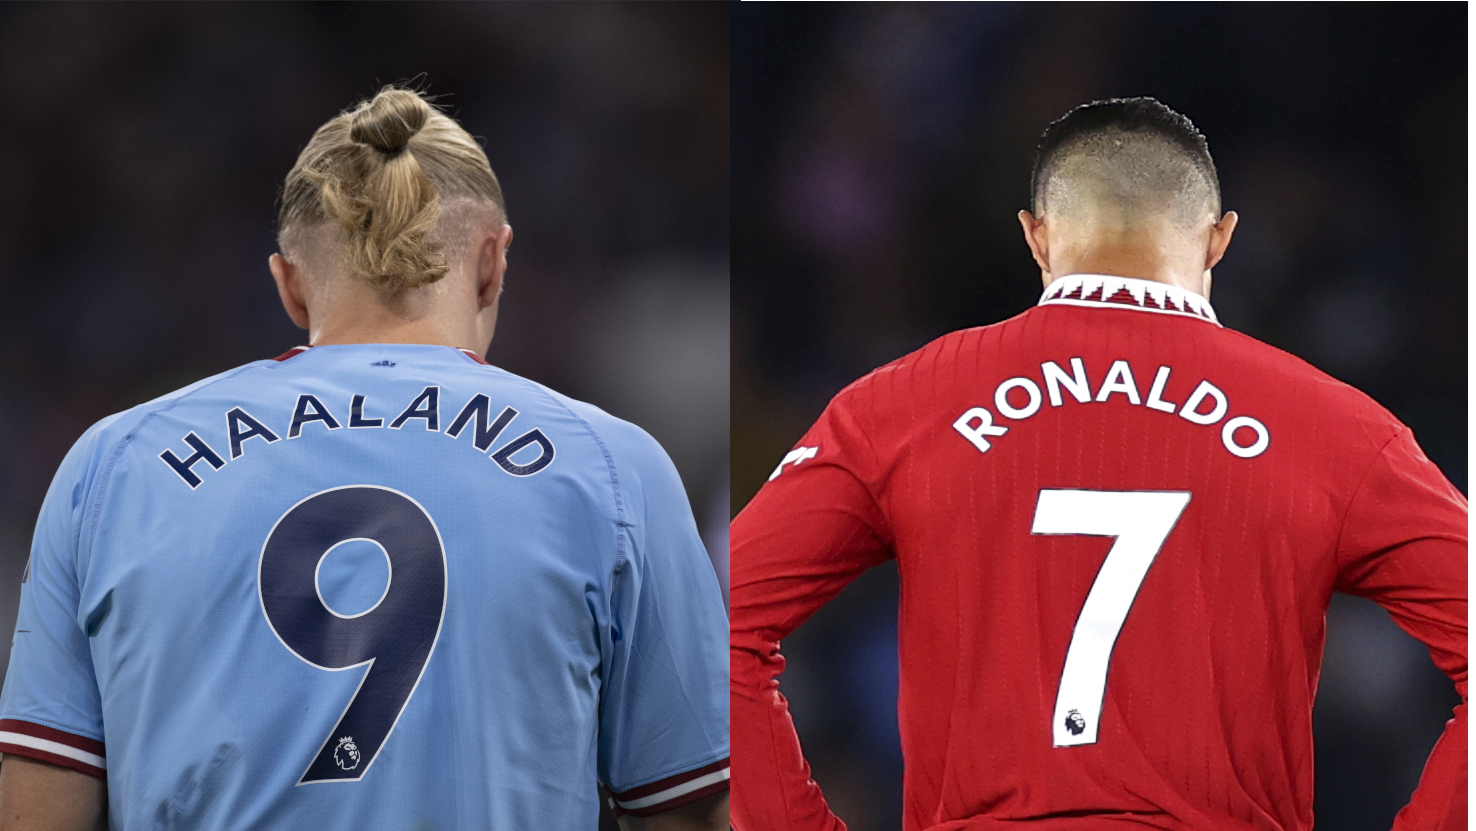 Man City vs Man Utd live stream how to watch Premier League online and on TV from anywhere, team news TechRadar